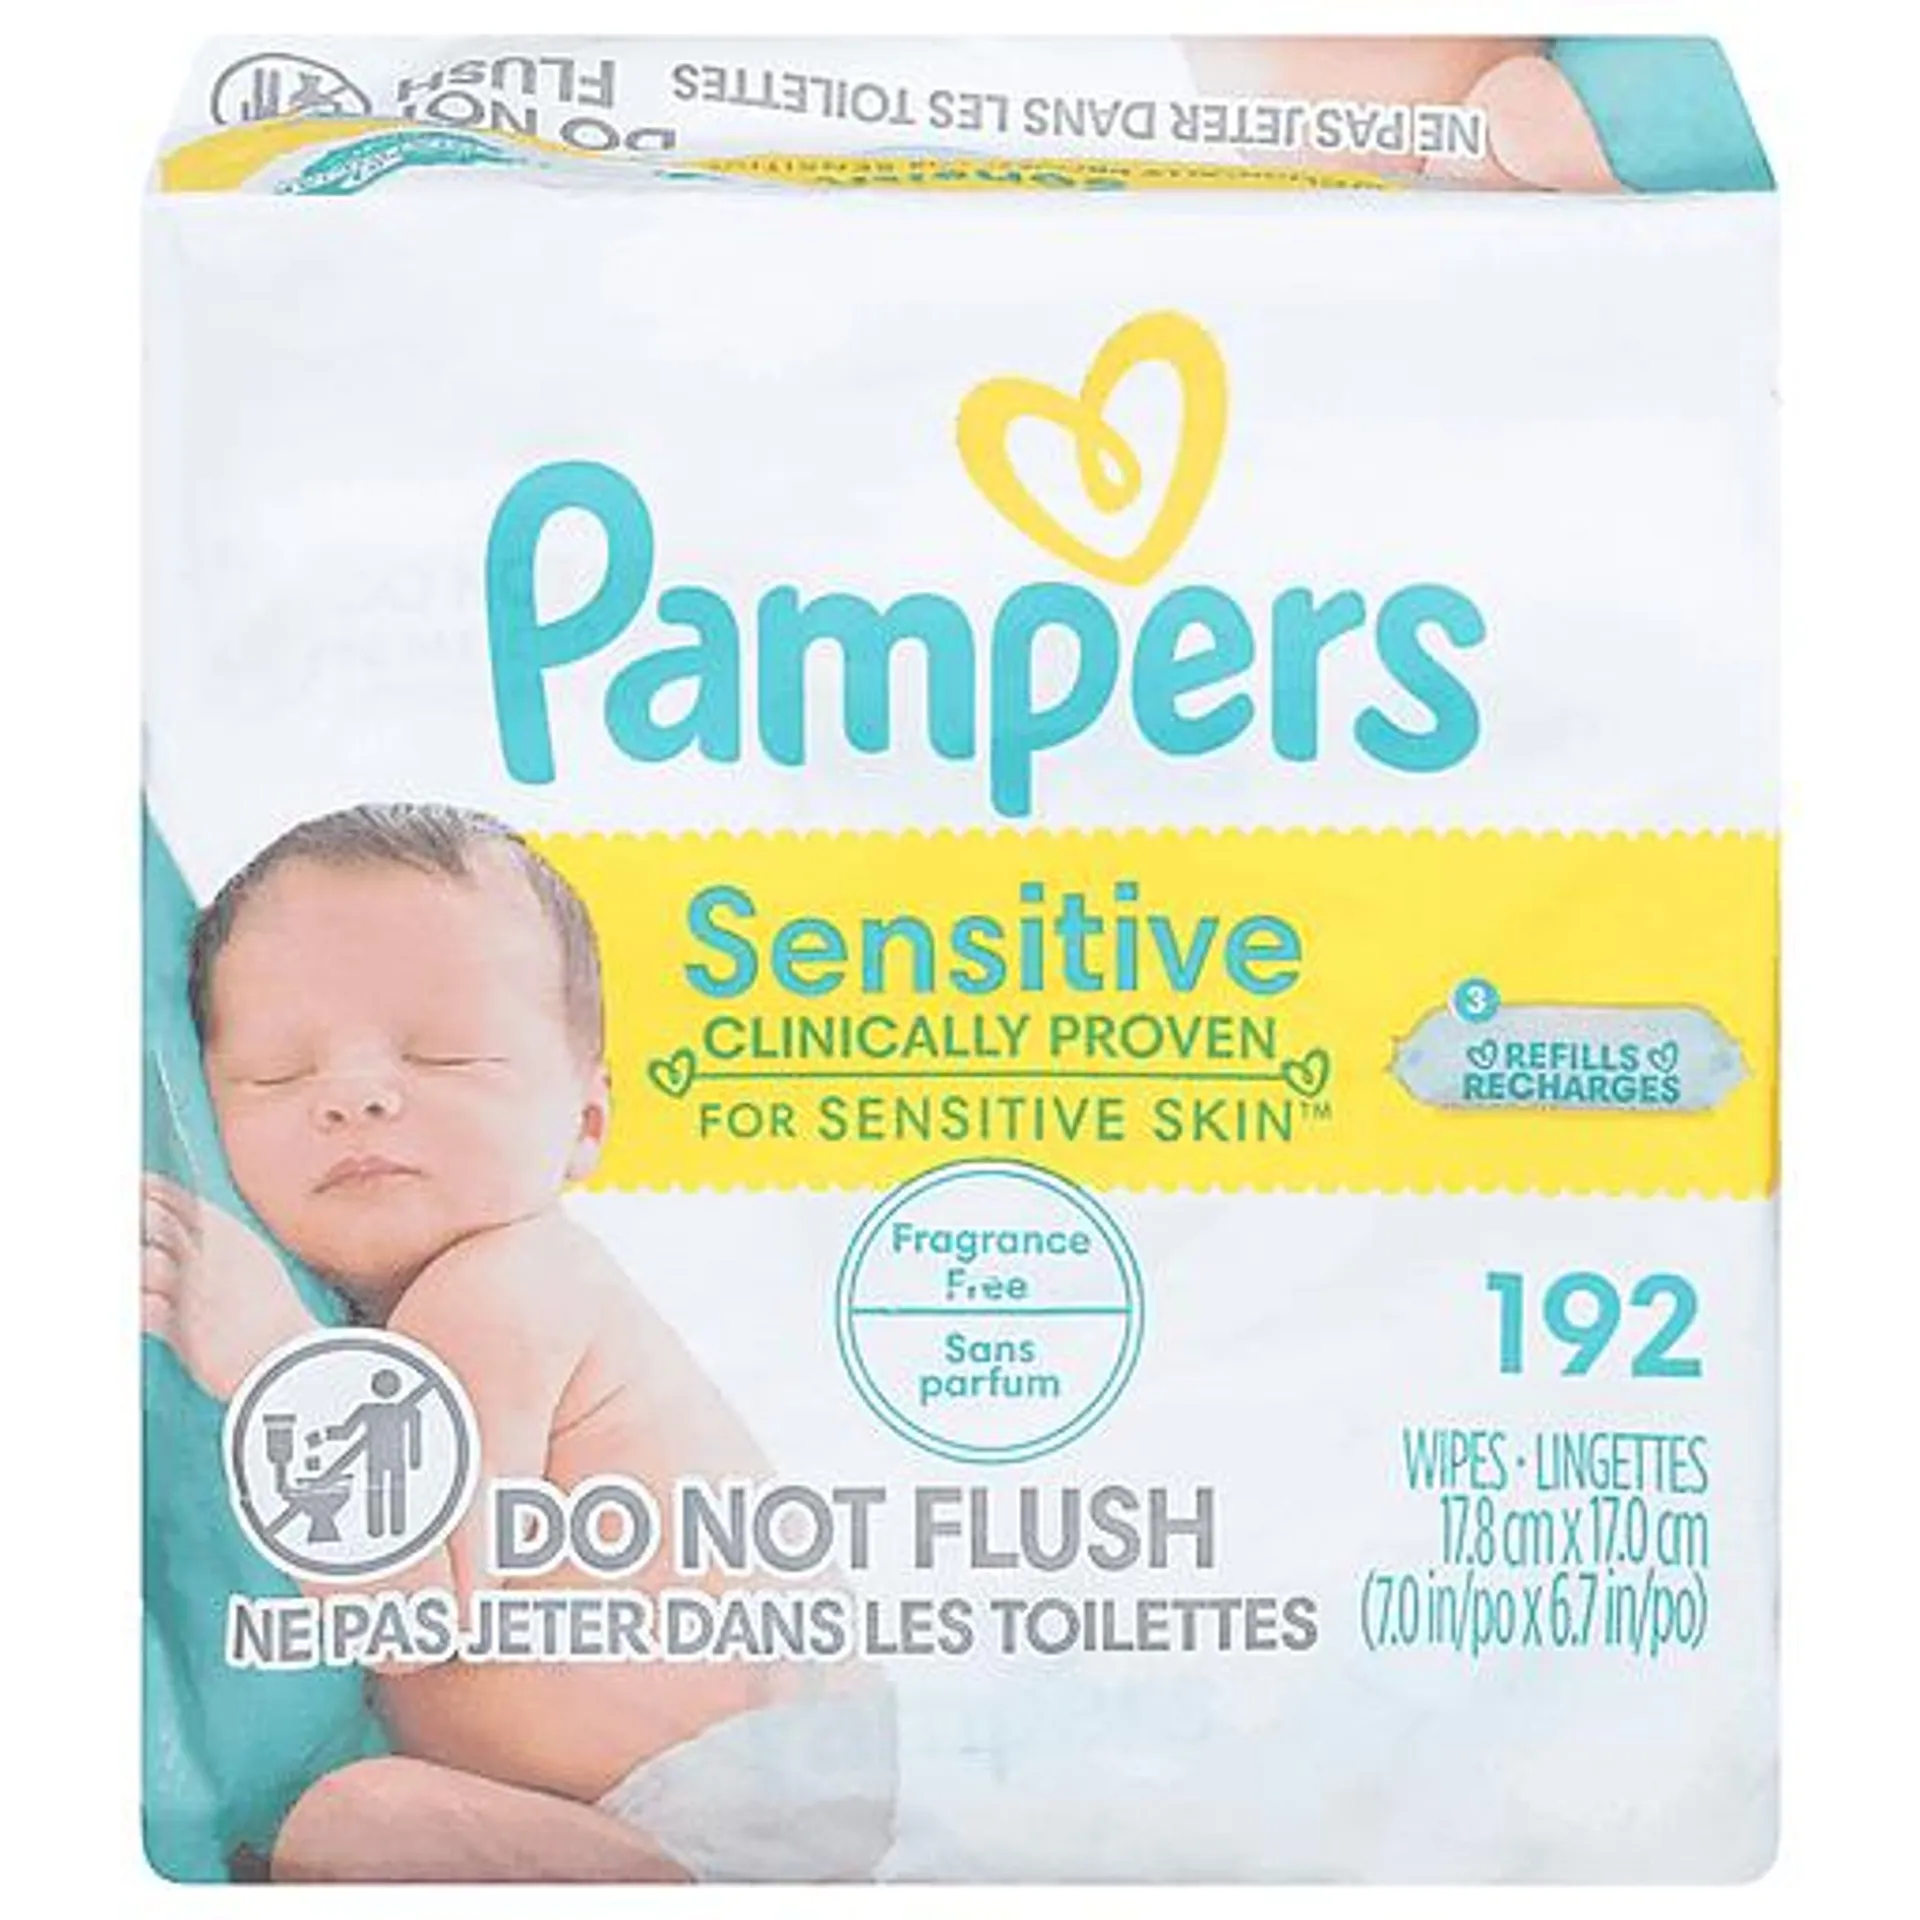 Pampers Sensitive Perfume Free Baby Wipes 192 ct 3 pack box